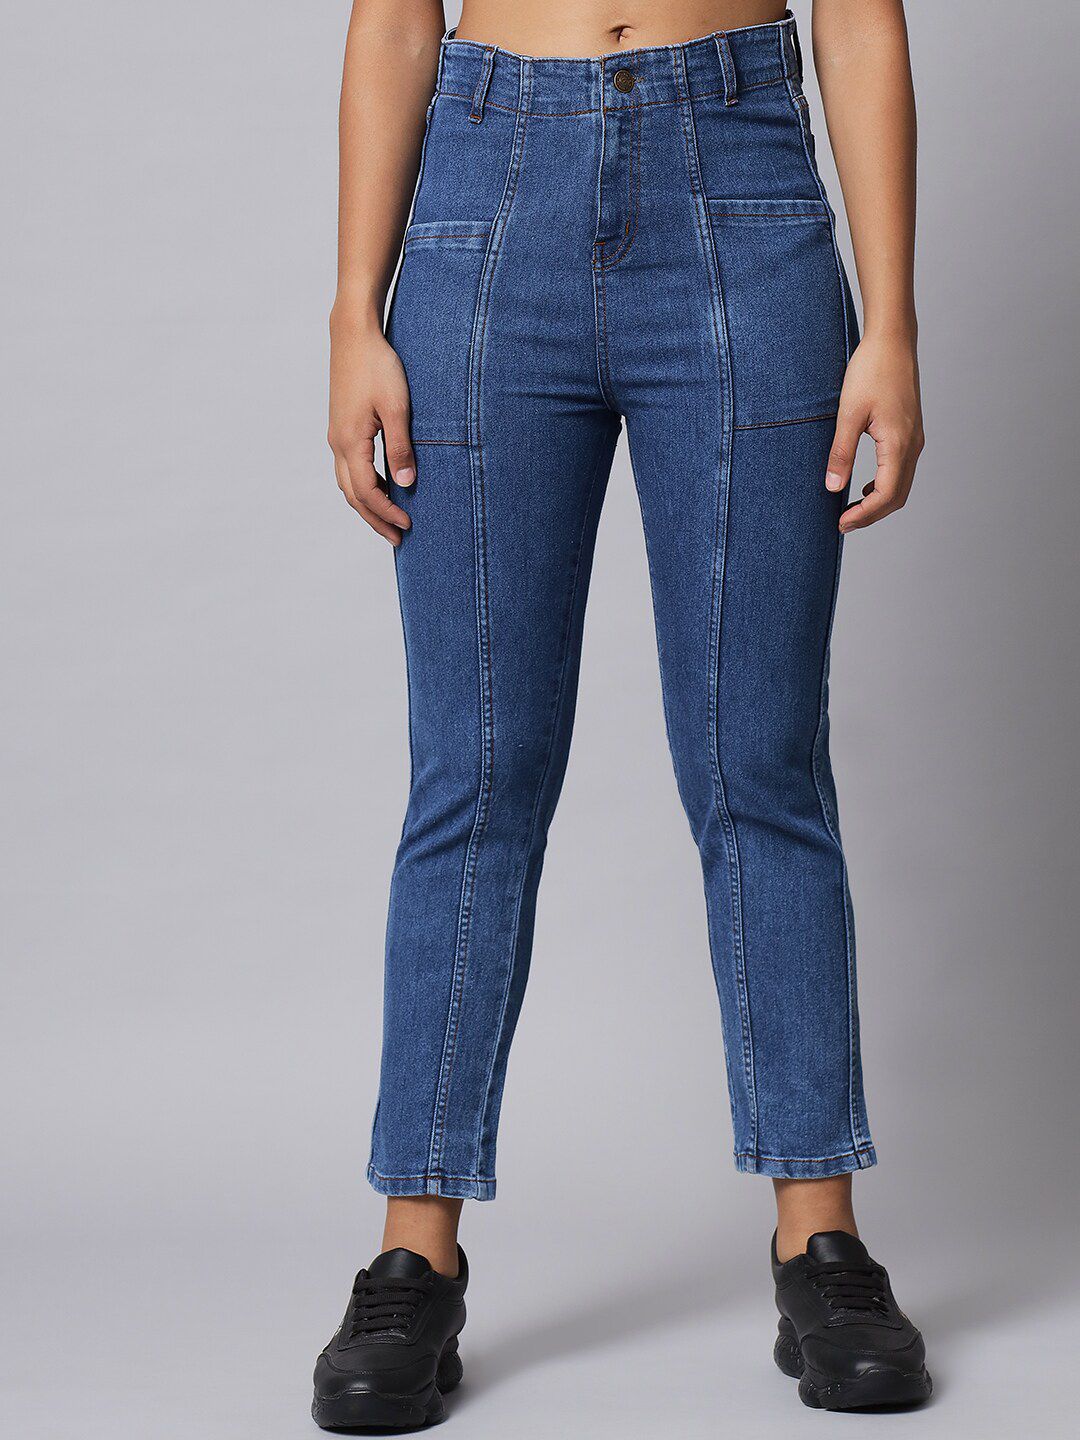 Q-rious Women Blue High-Rise Stretchable Jeans Price in India